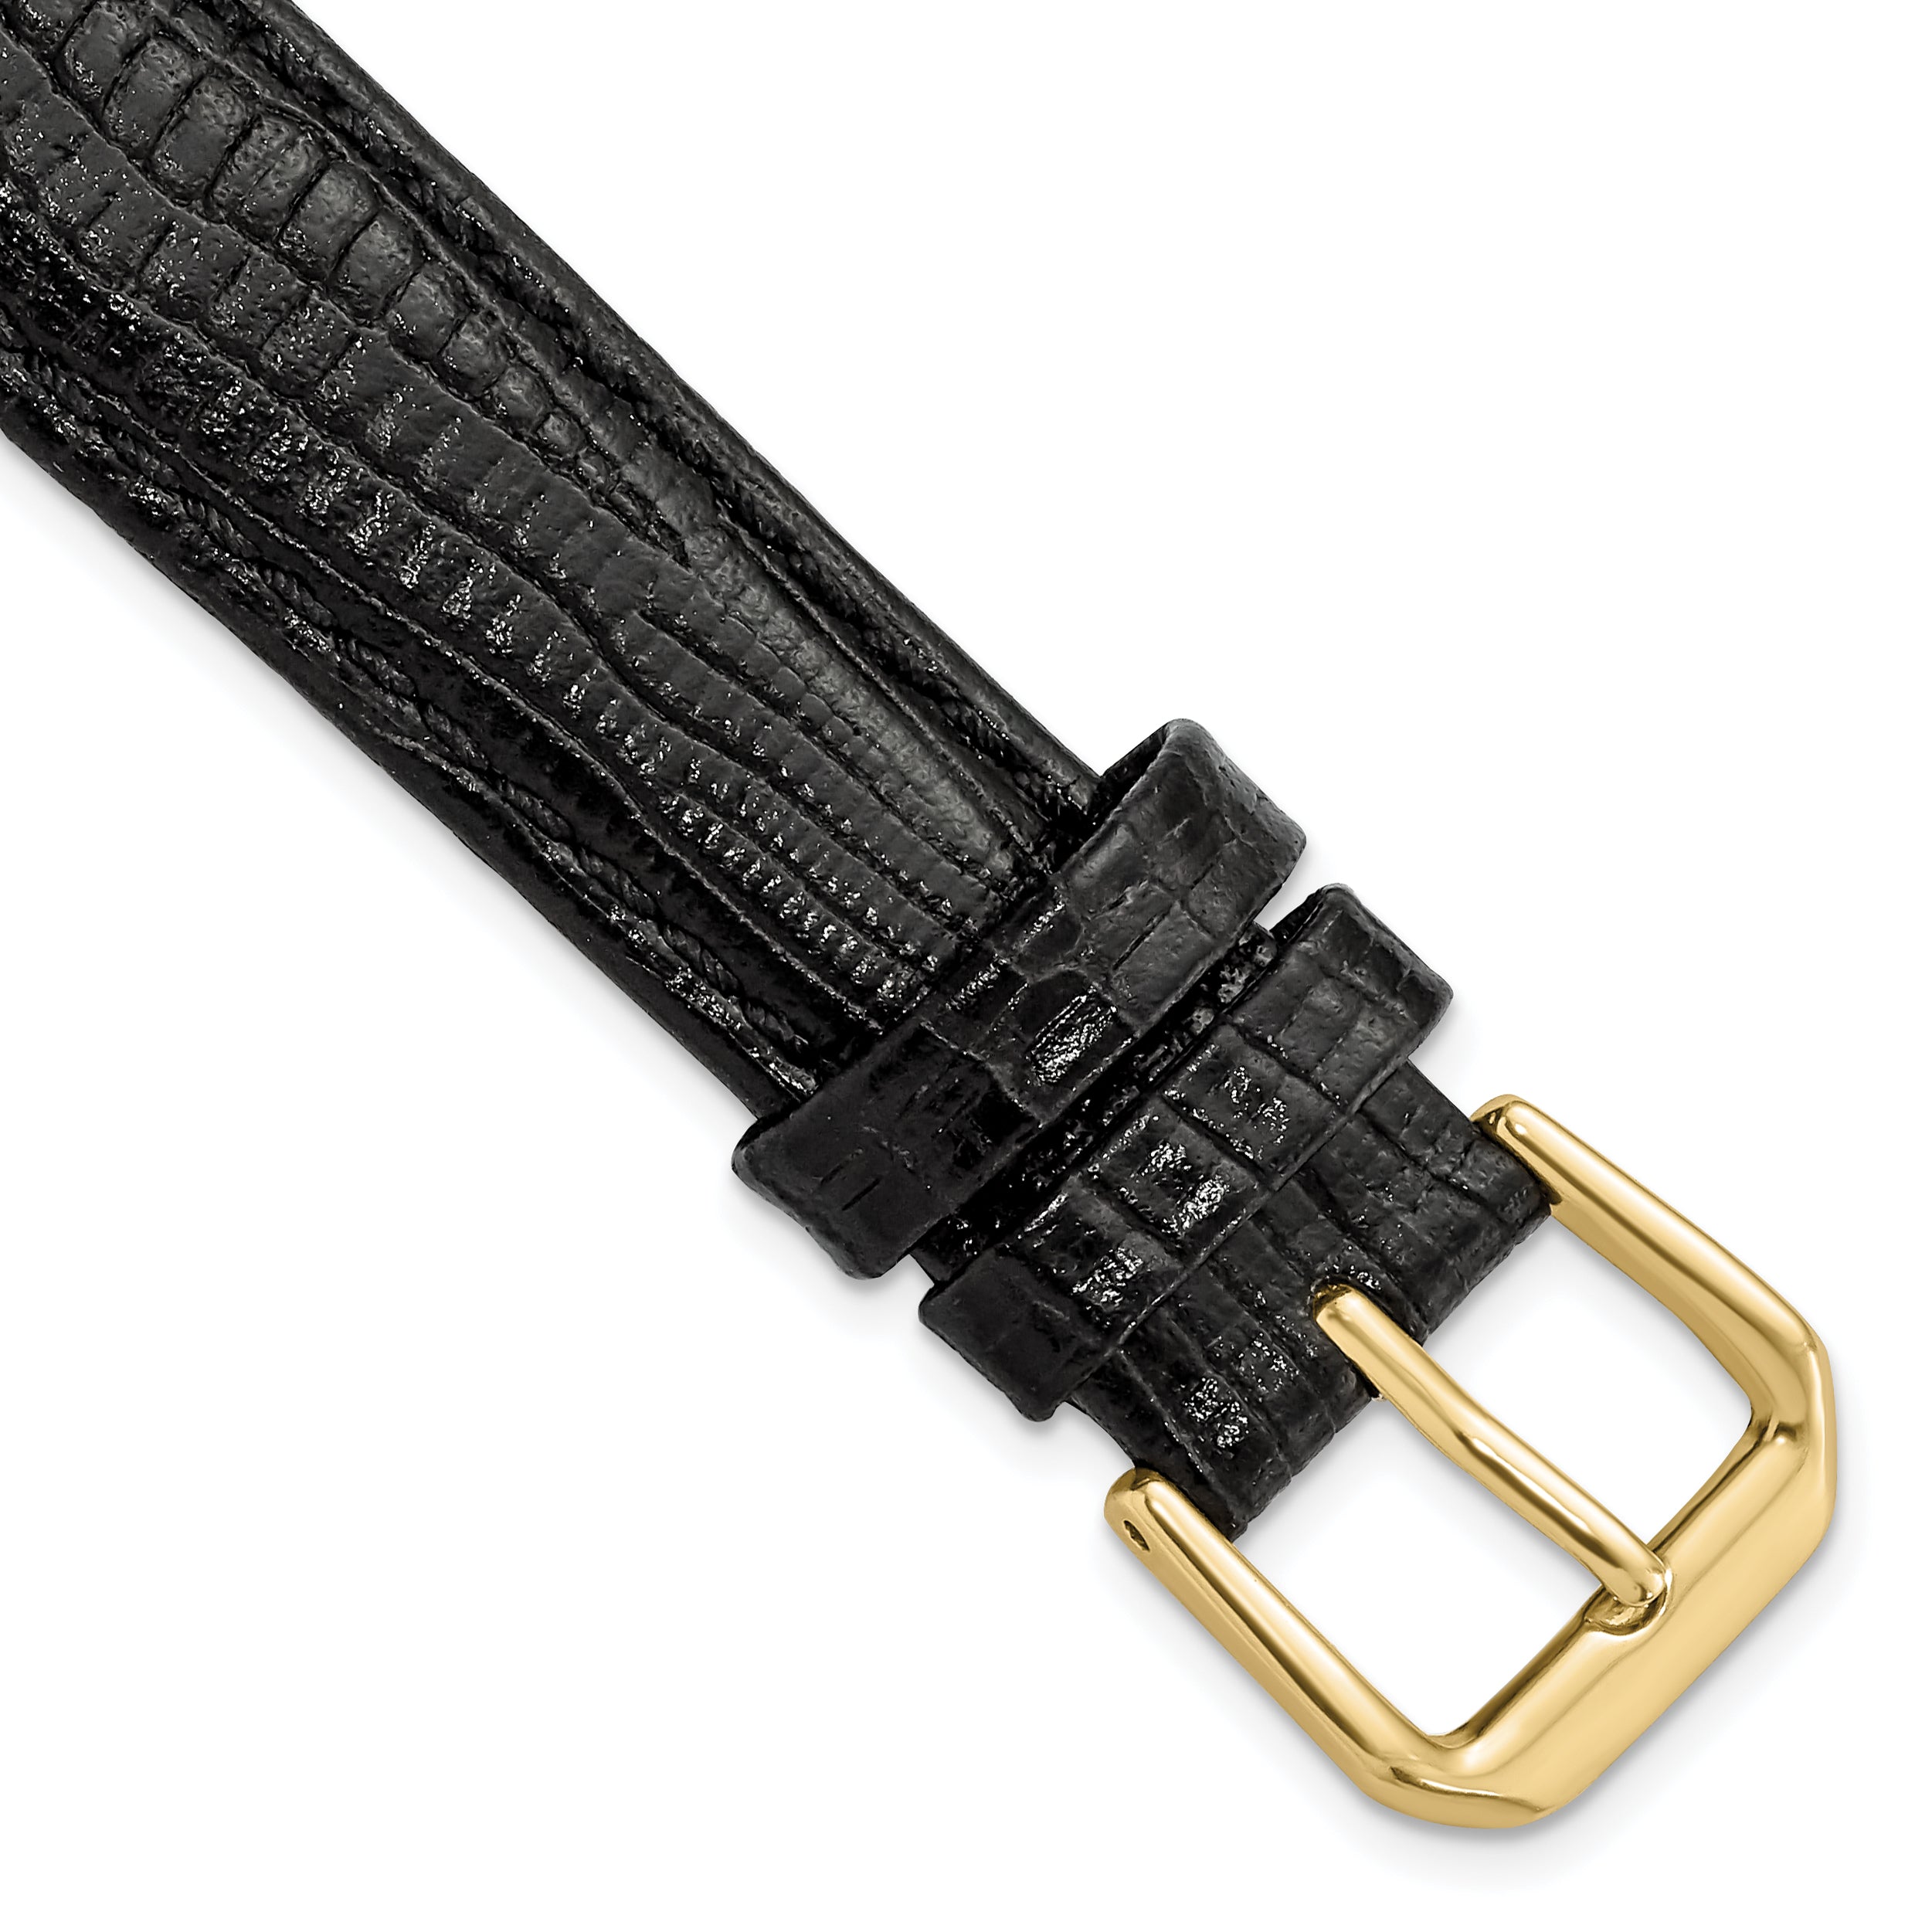 DeBeer 16mm Black Snake Grain Leather with Gold-tone Buckle 7.5 inch Watch Band